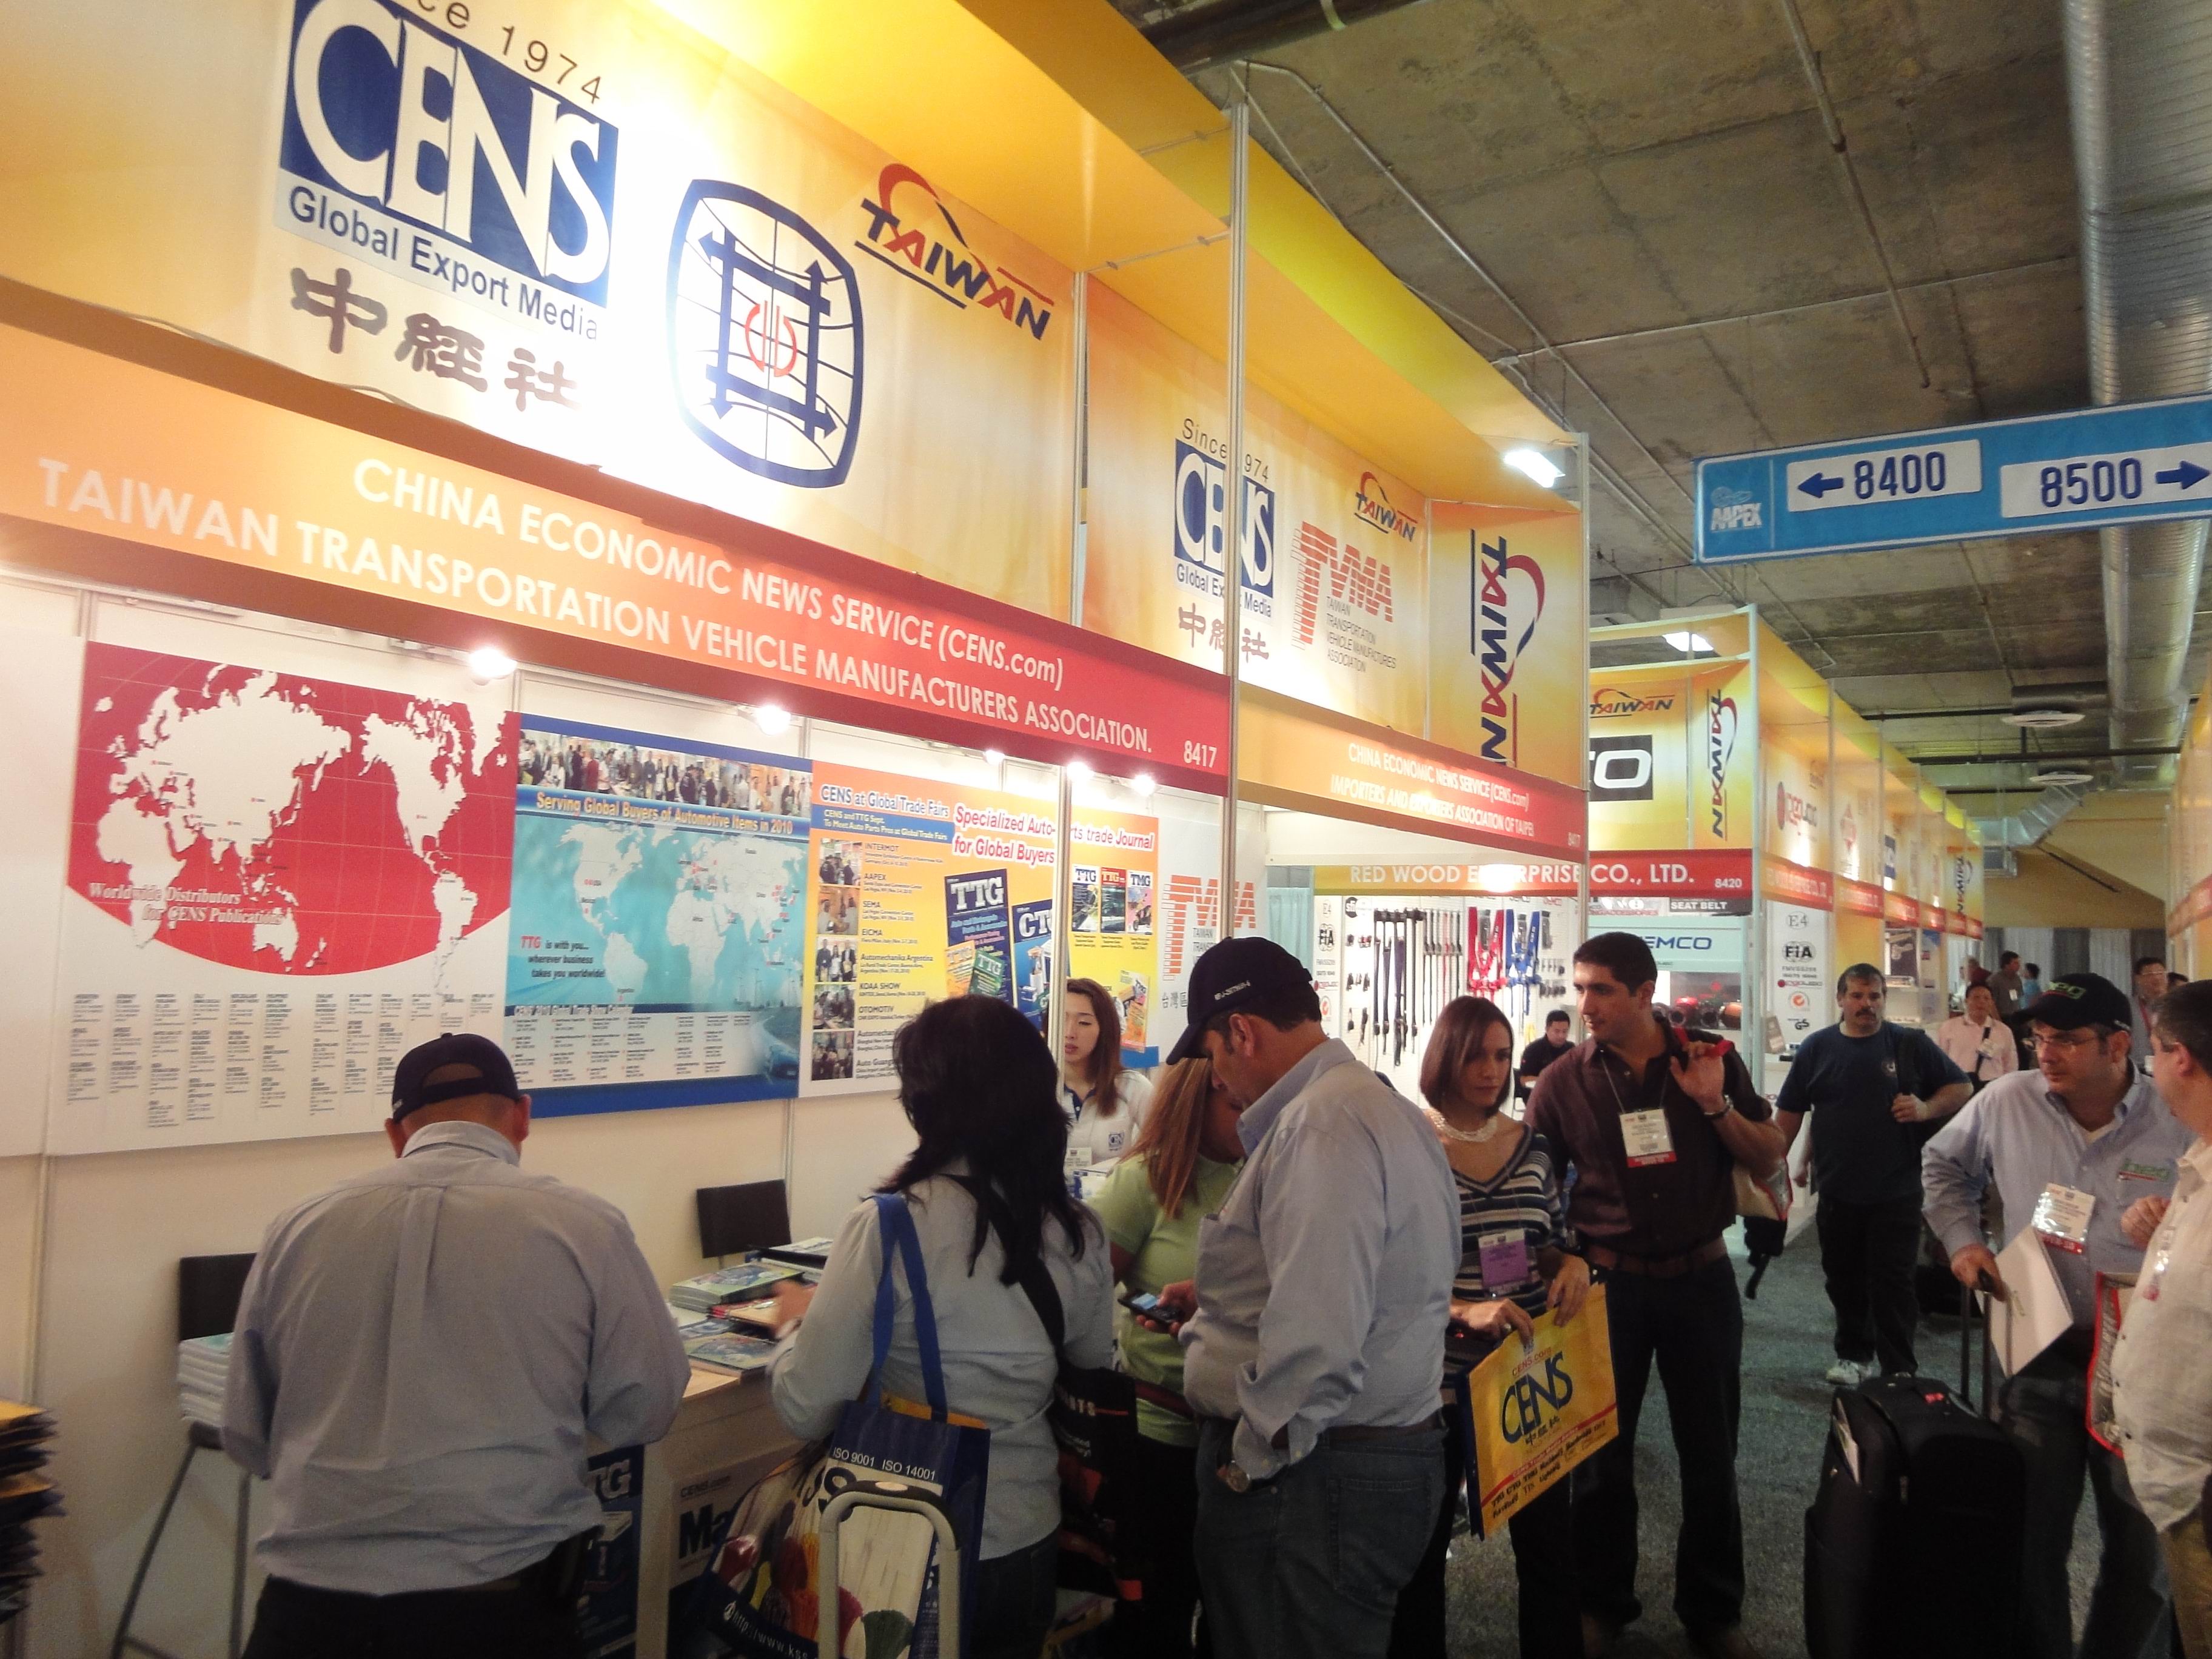 CENS booth draws many visitors at AAPEX/Las Vegas.